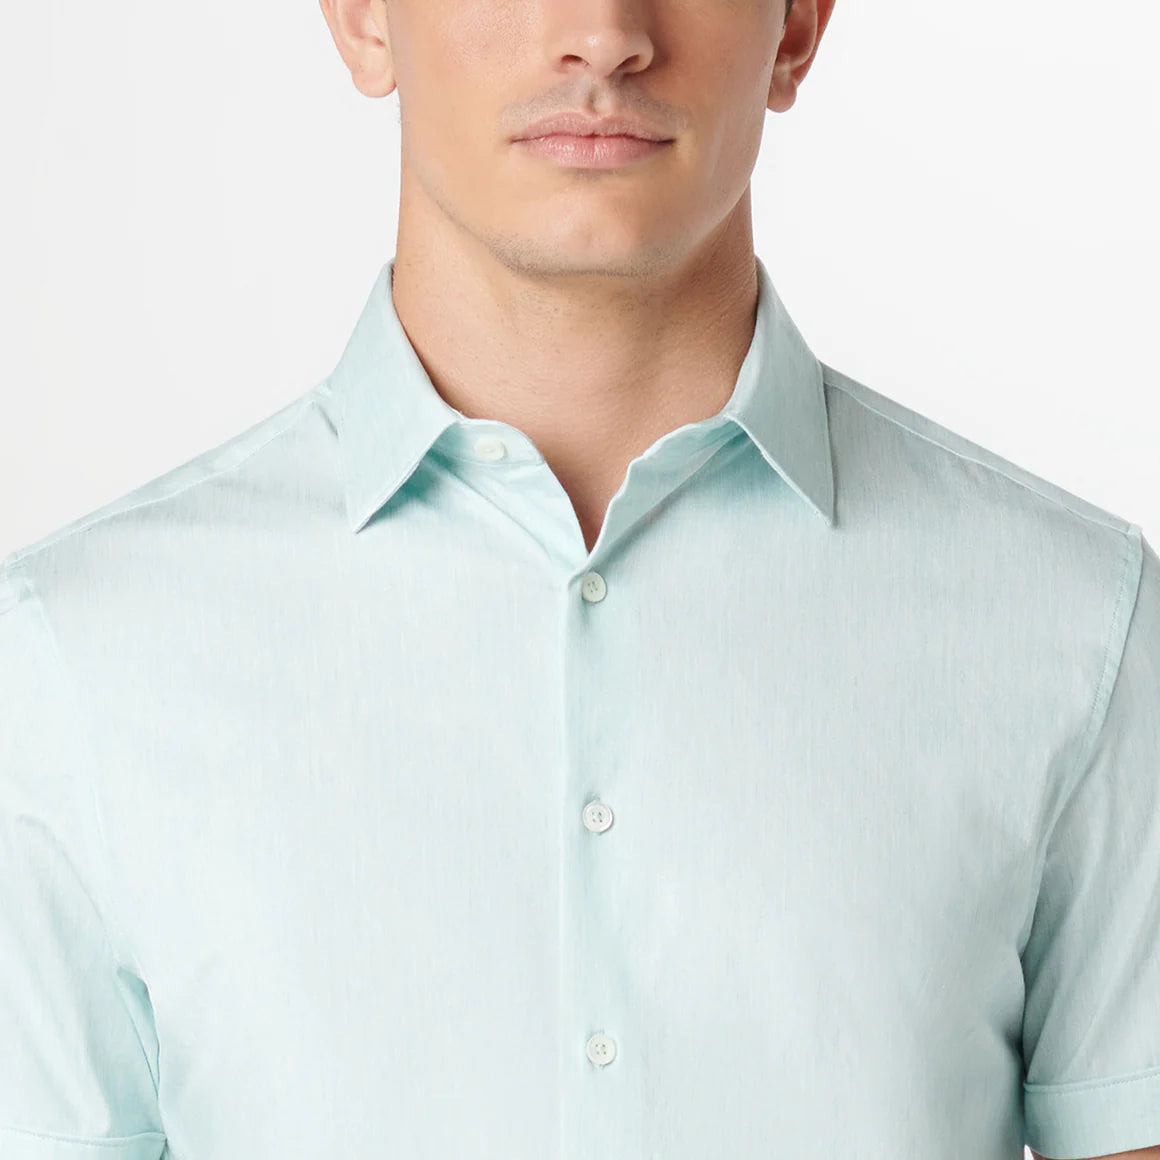 The Miles short-sleeved shirt features a chambray effect print on OoohCotton fabric, a point collar, genuine shell buttons, and a curved hem. OoohCotton is a double-mercerized, wrinkle-resistant, breathable, and easy-care cotton blend with 8-way stretch, quick-dry, and thermal comfort properties